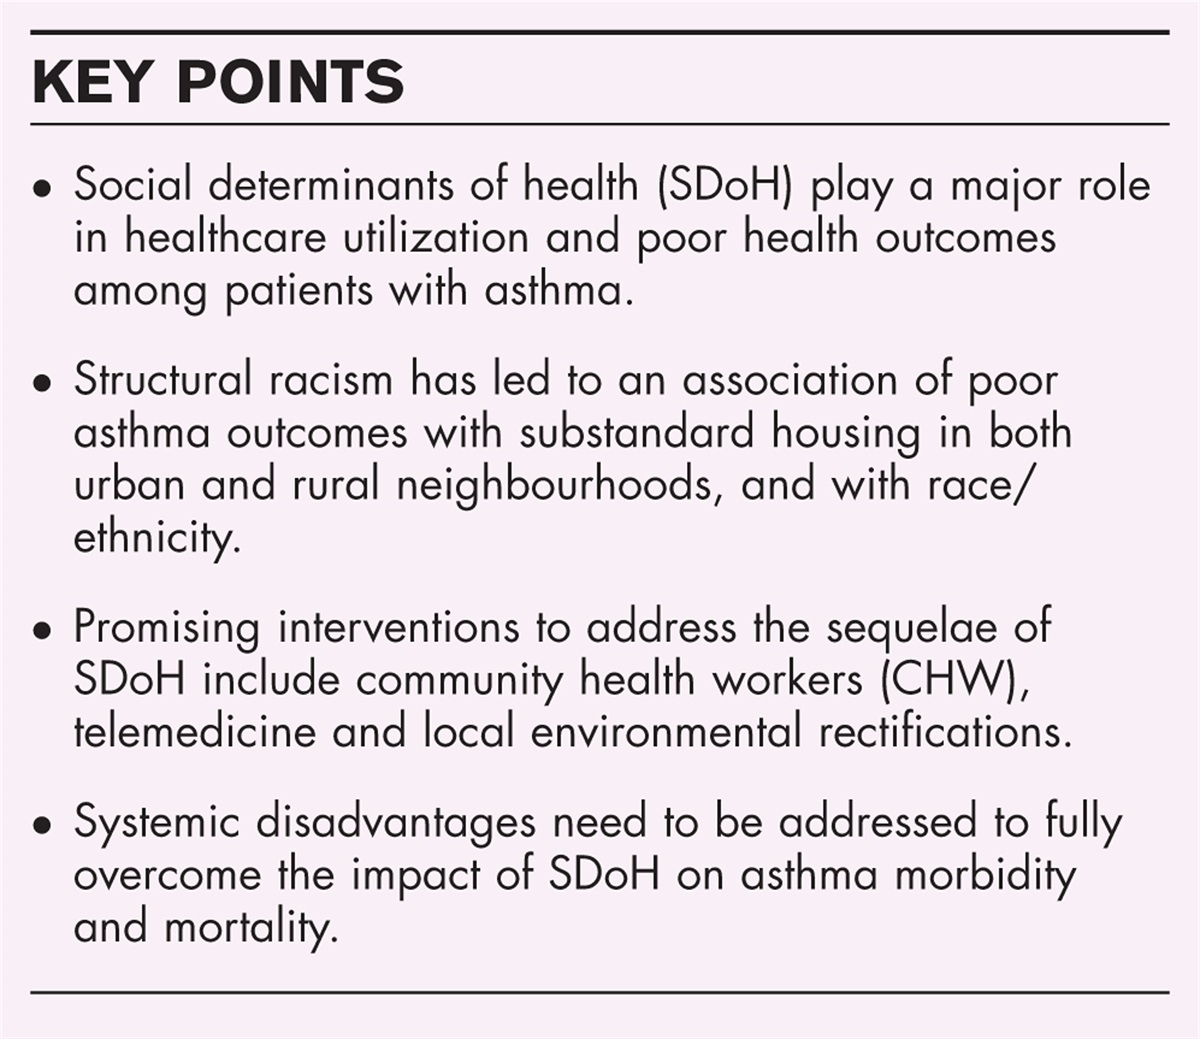 Social determinants of health and asthma